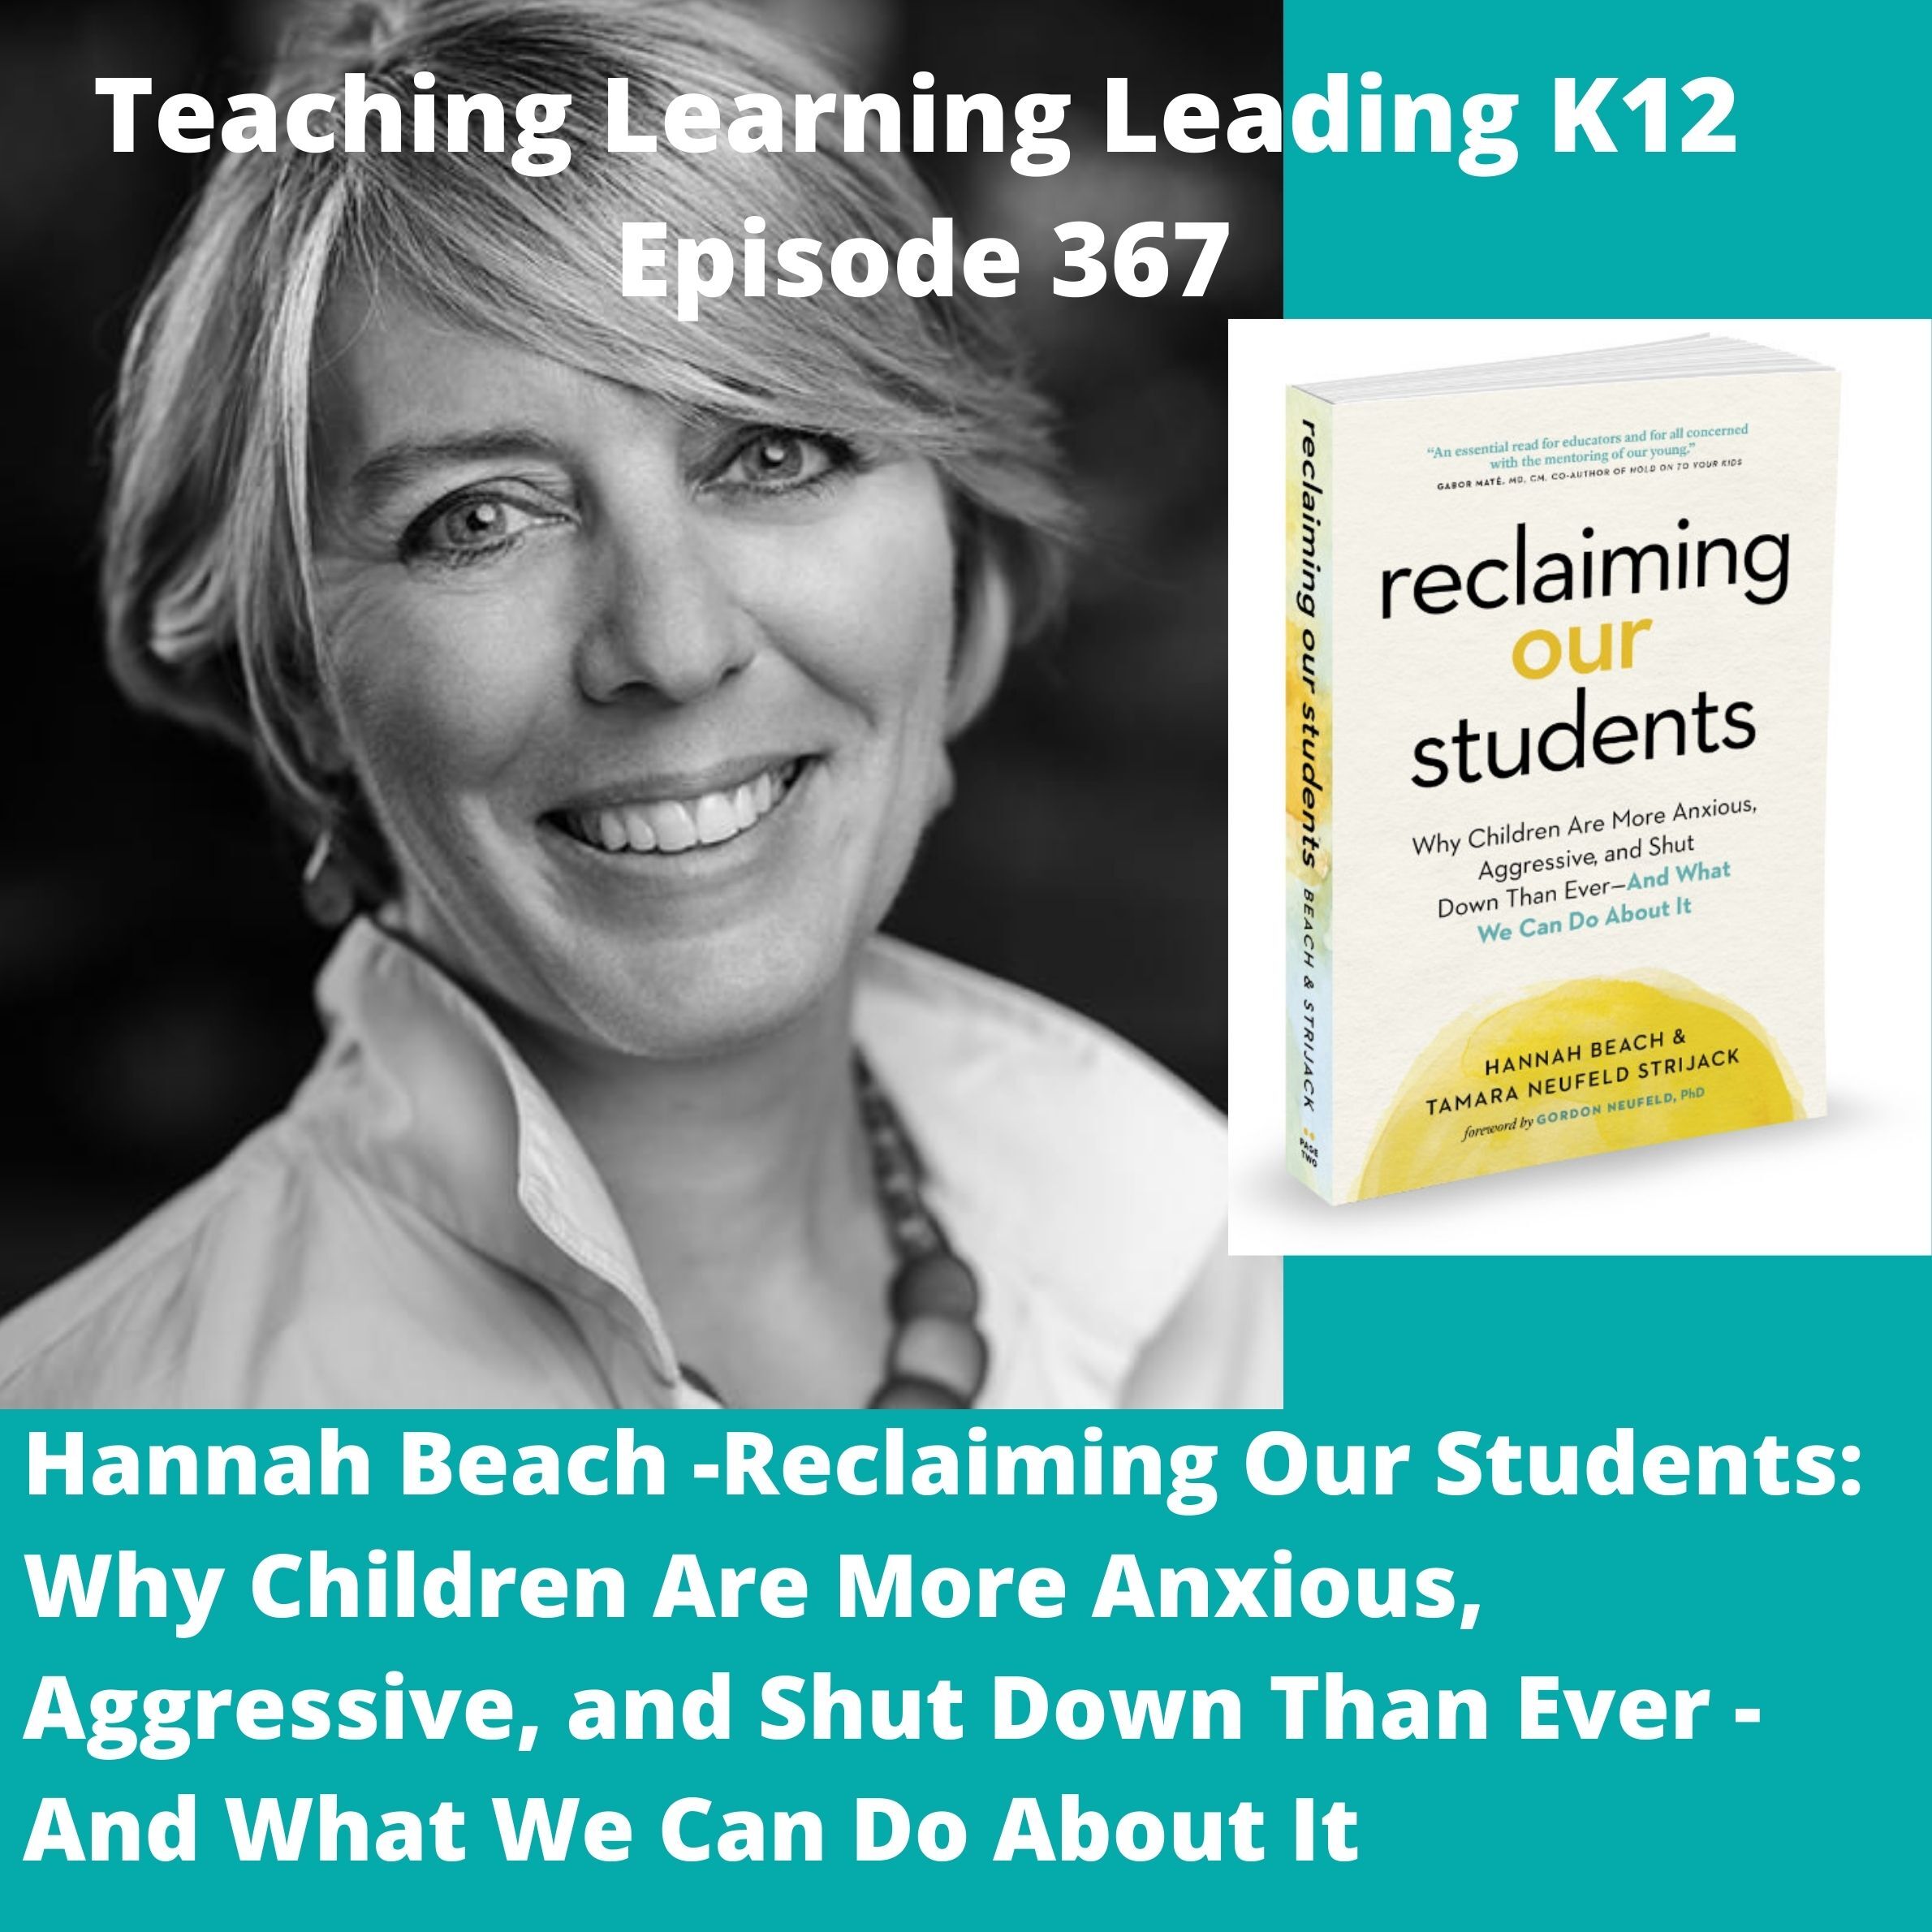 Hannah Beach - Reclaiming Our Students: Why Children Are More Anxious, Aggressive, and Shut Down Than Ever - And what We Can Do About It - 367 Image